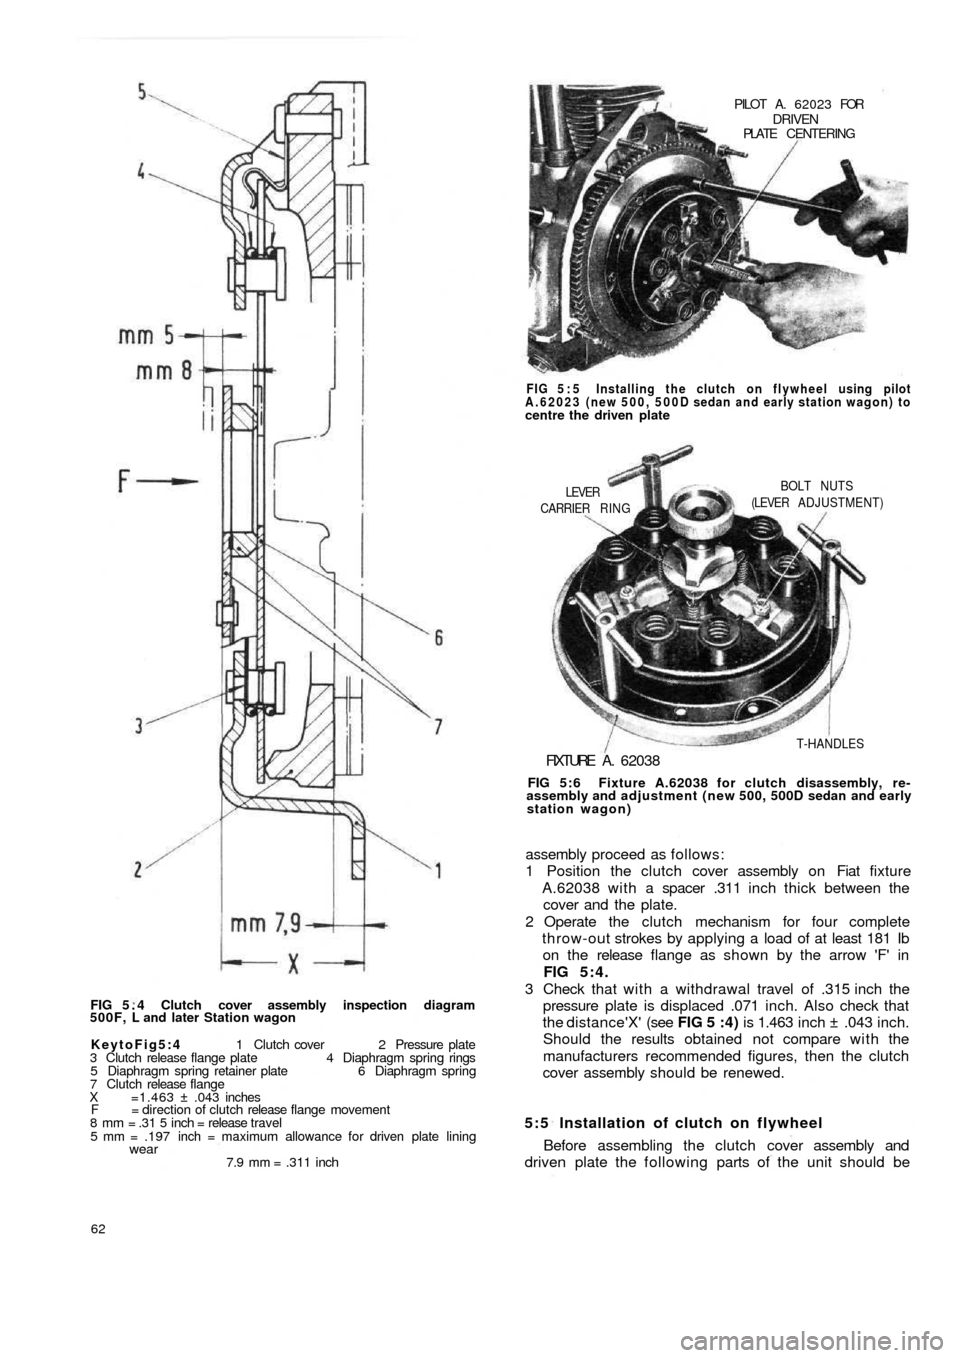 FIAT 500 1960 1.G Workshop Manual FIG 5 . 4  Clutch cover assembly inspection diagram
500F, L and later Station wagon
KeytoFig5:4 1 Clutch cover 2 Pressure plate
3 Clutch release flange plate 4 Diaphragm spring rings
5 Diaphragm sprin